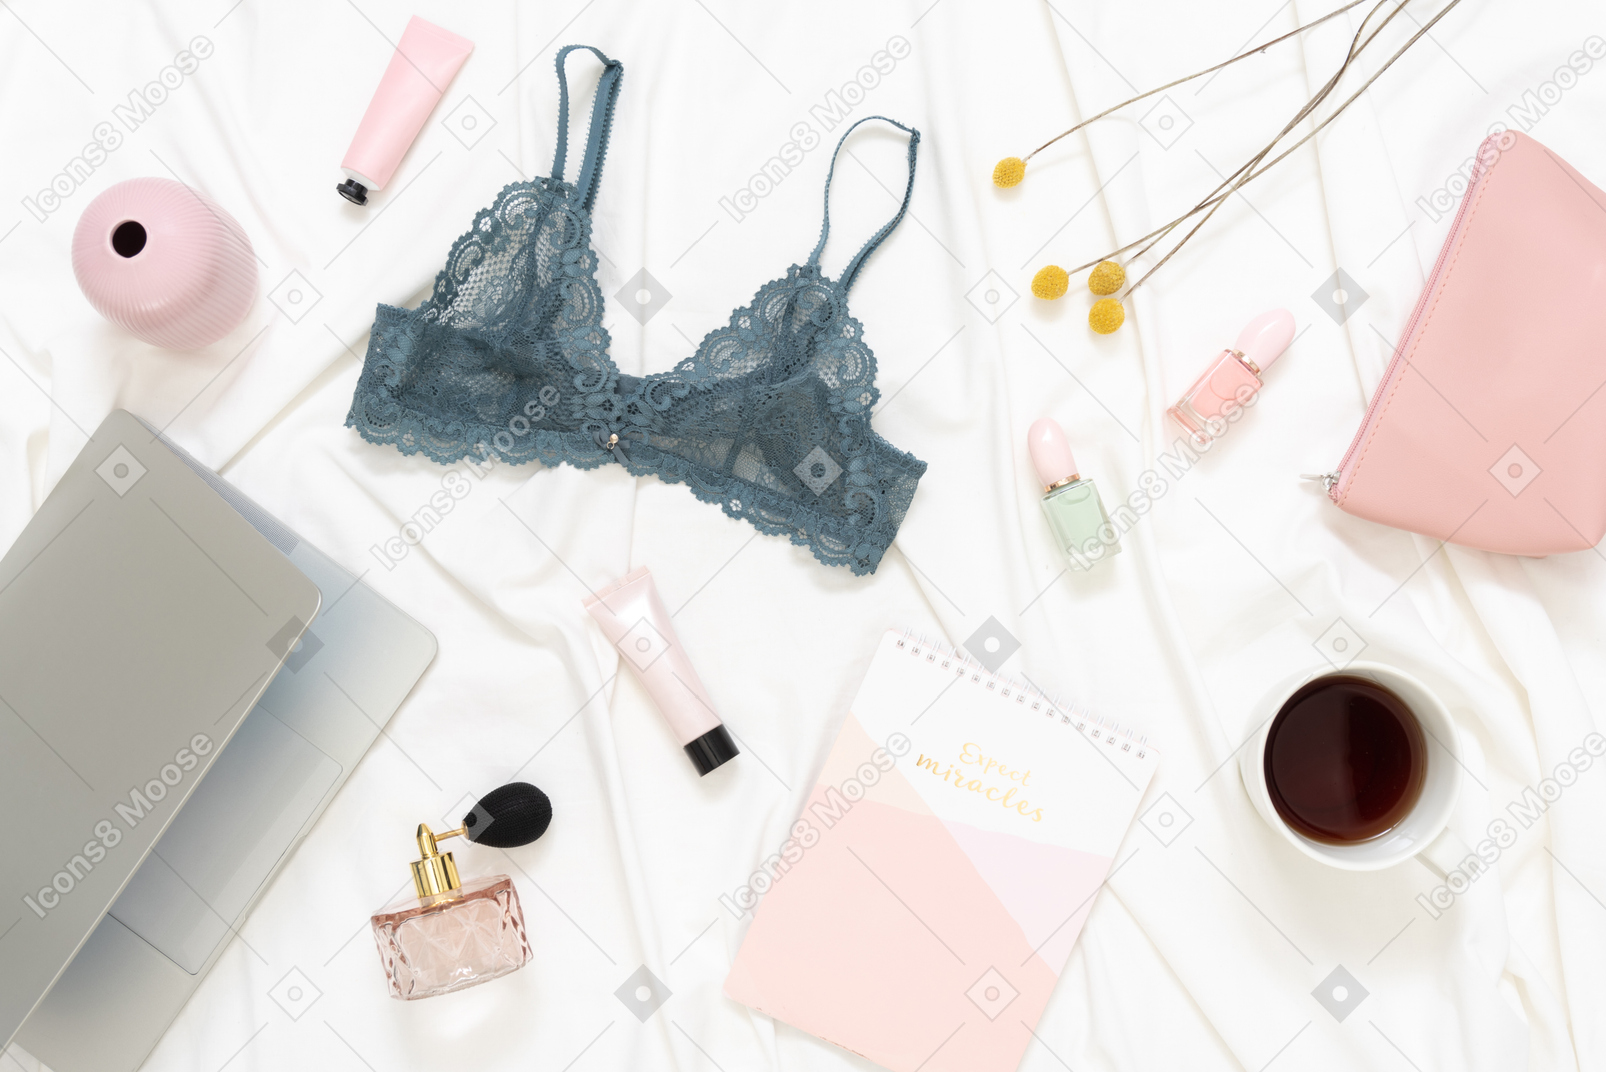 Lace lingerie, laptop and cosmetics objects